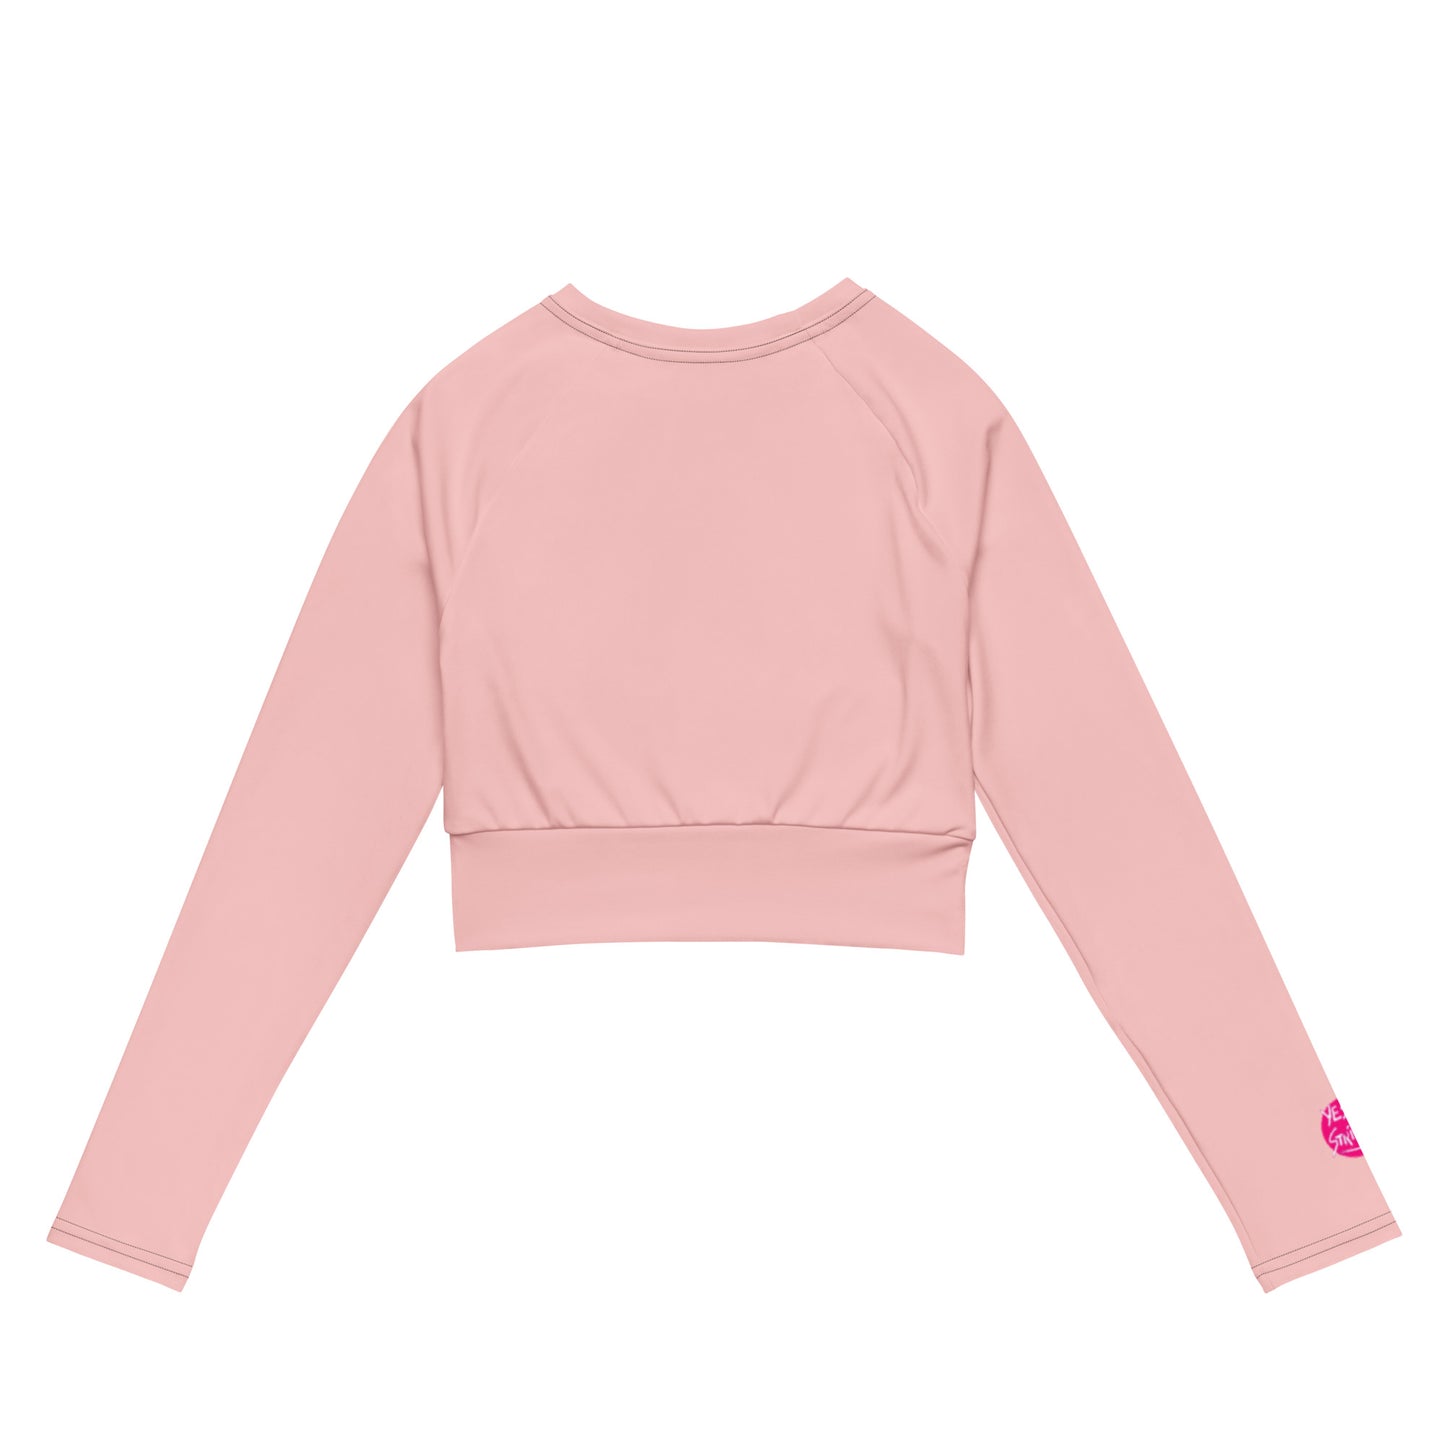 "Cuntrover$ial" by Nova Caine - PINK Crop Top